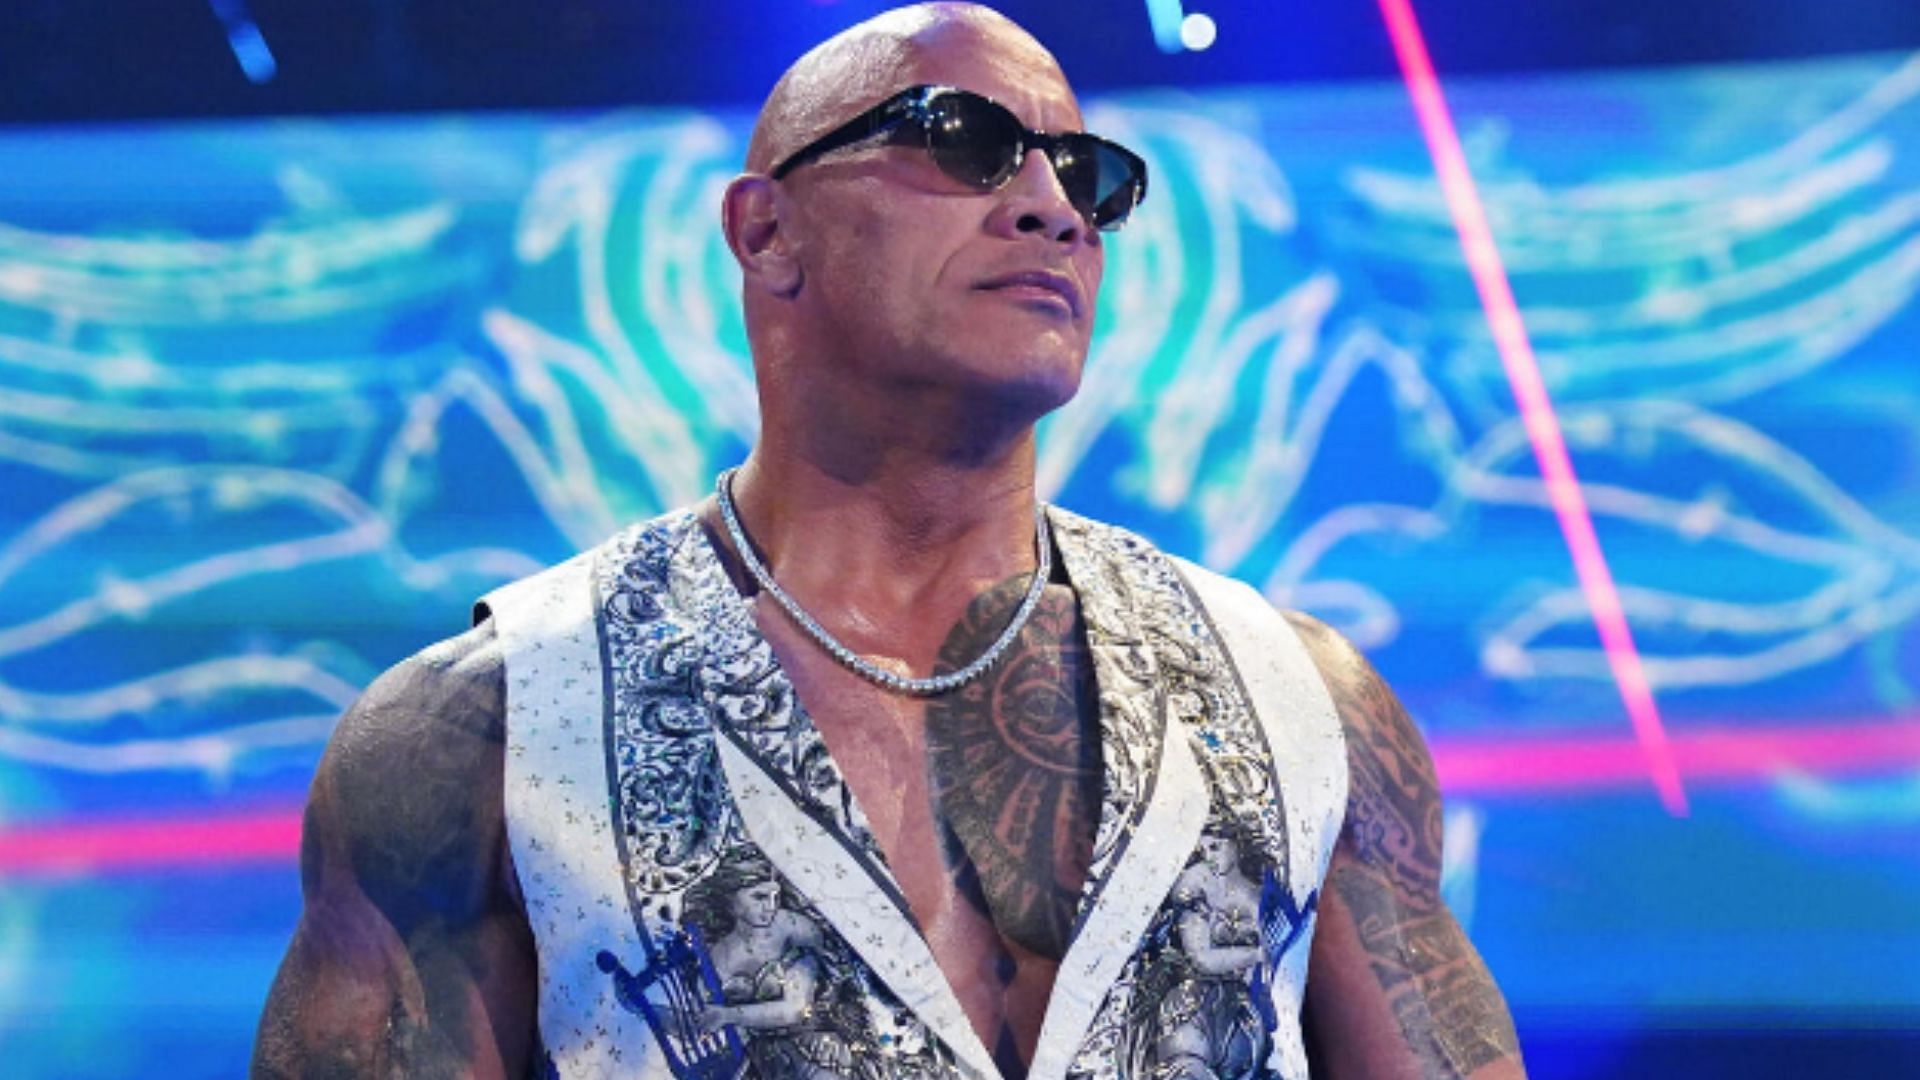 The Rock is the self-proclaimed Final Boss of WWE [Image Credits: WWE